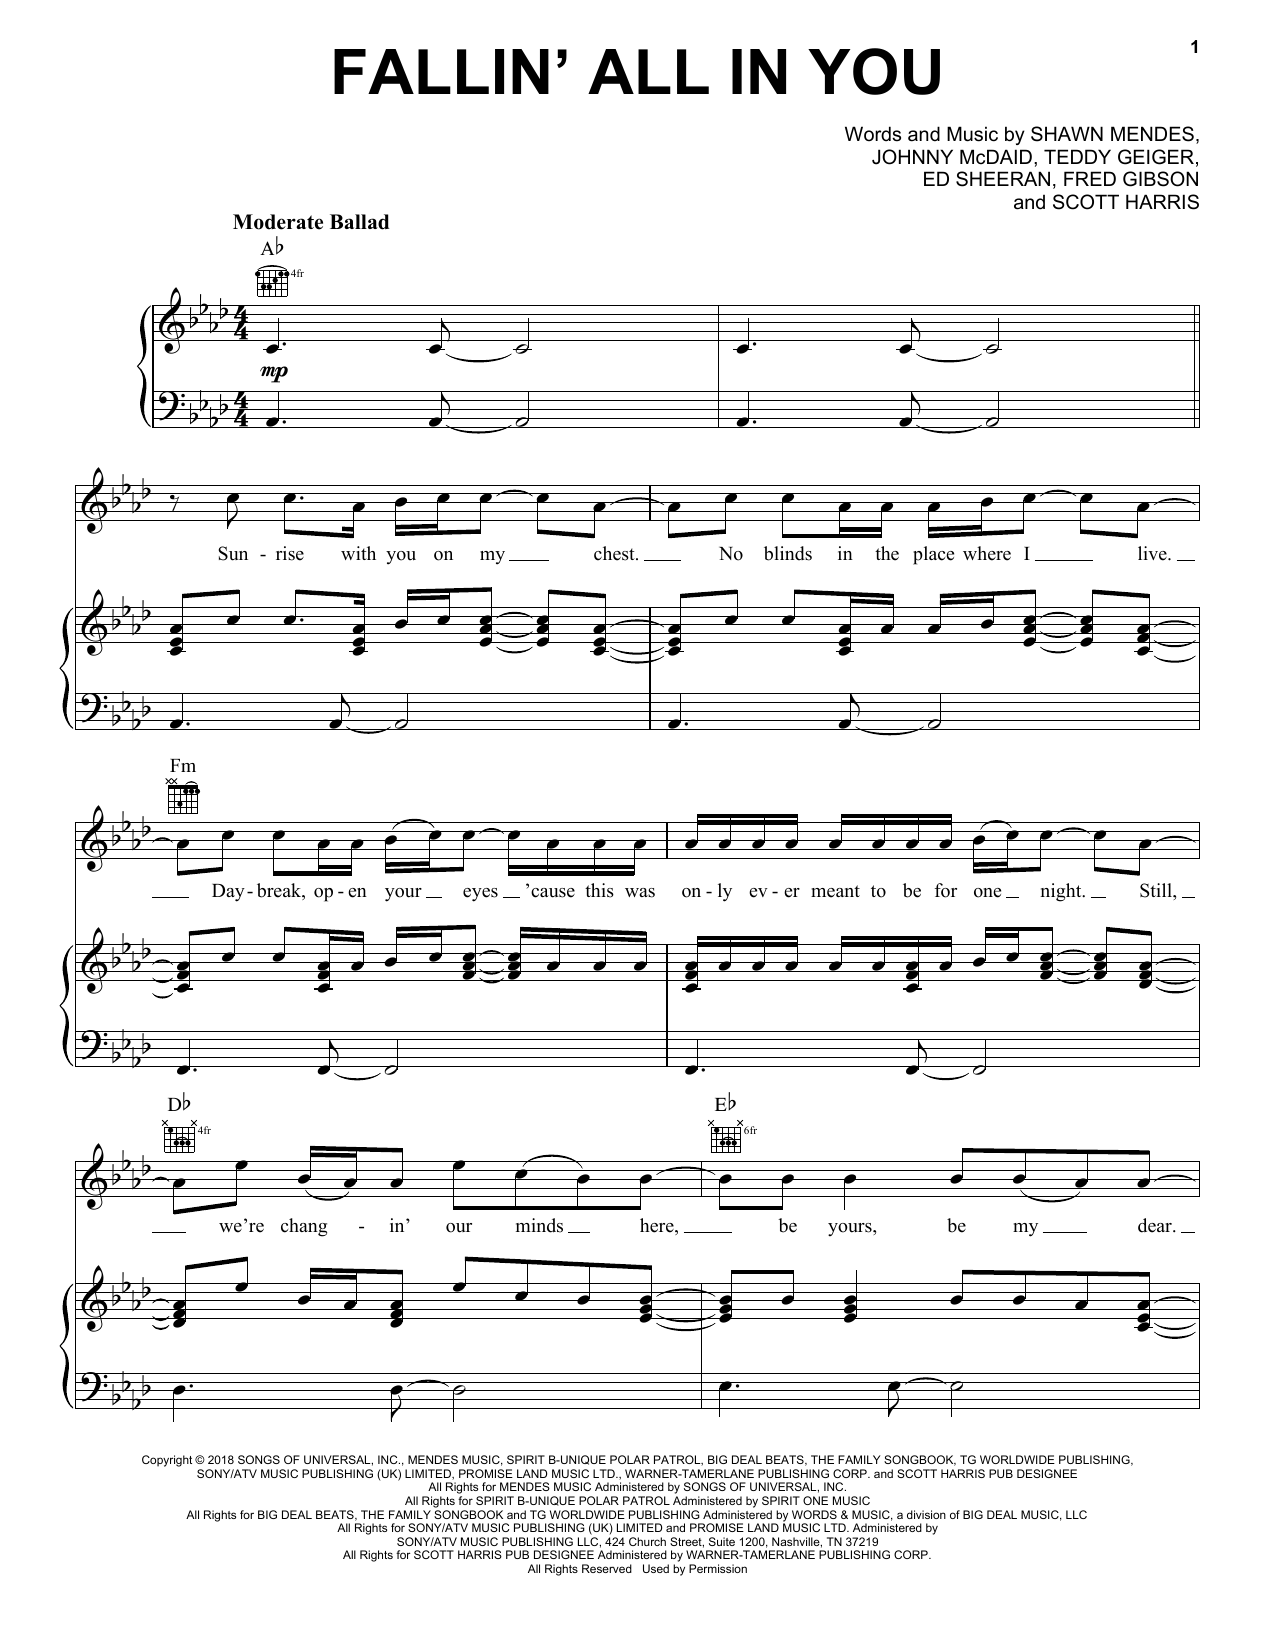 Download Shawn Mendes Fallin' All In You Sheet Music